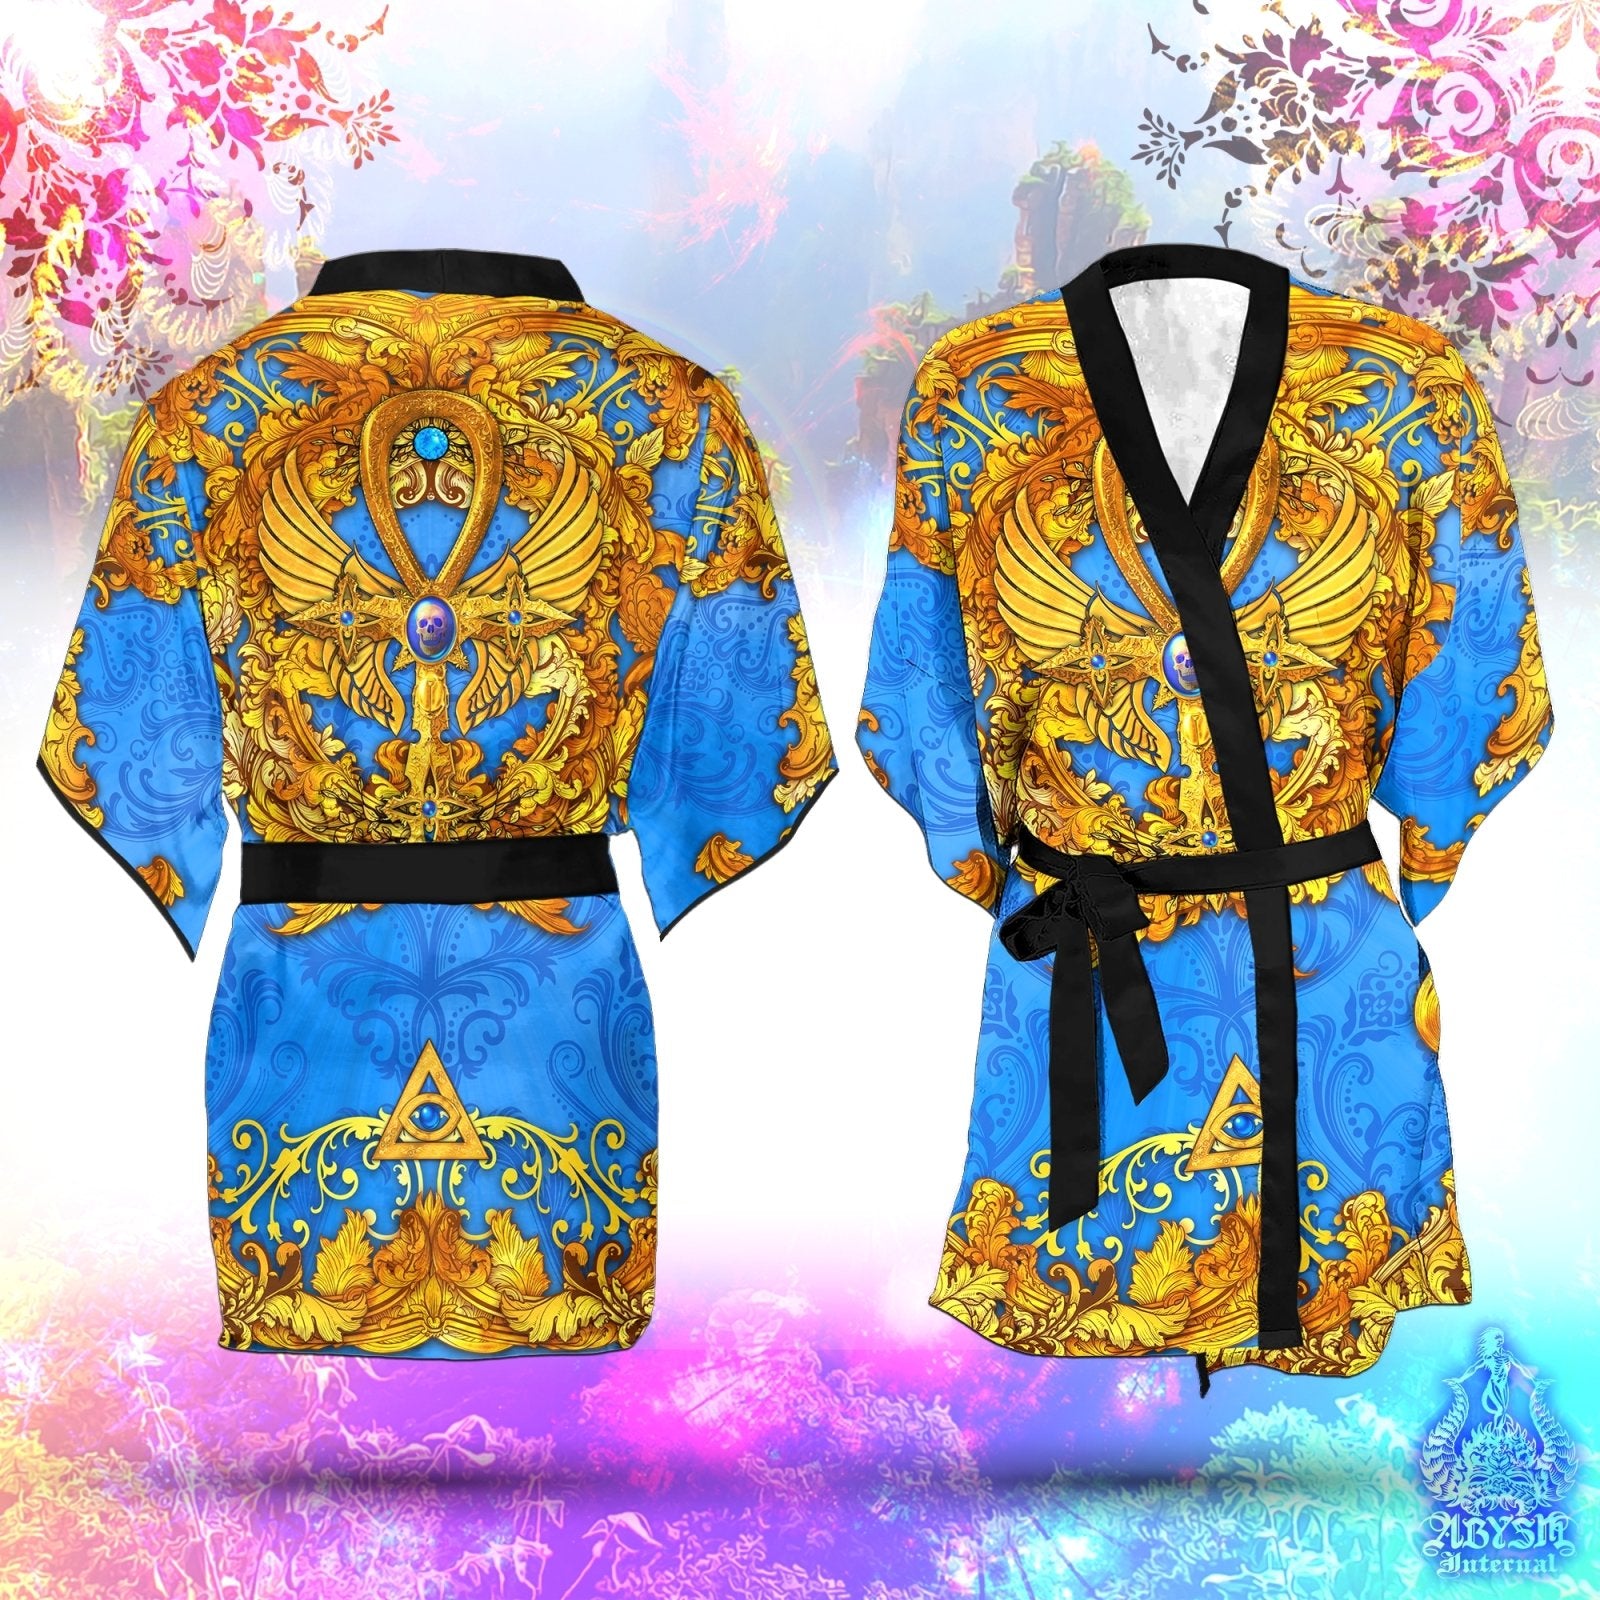 Ankh Cover Up, Beach Outfit, Party Kimono, Occult Summer Festival Robe, Indie and Alternative Clothing, Unisex - Cyan Gold - Abysm Internal